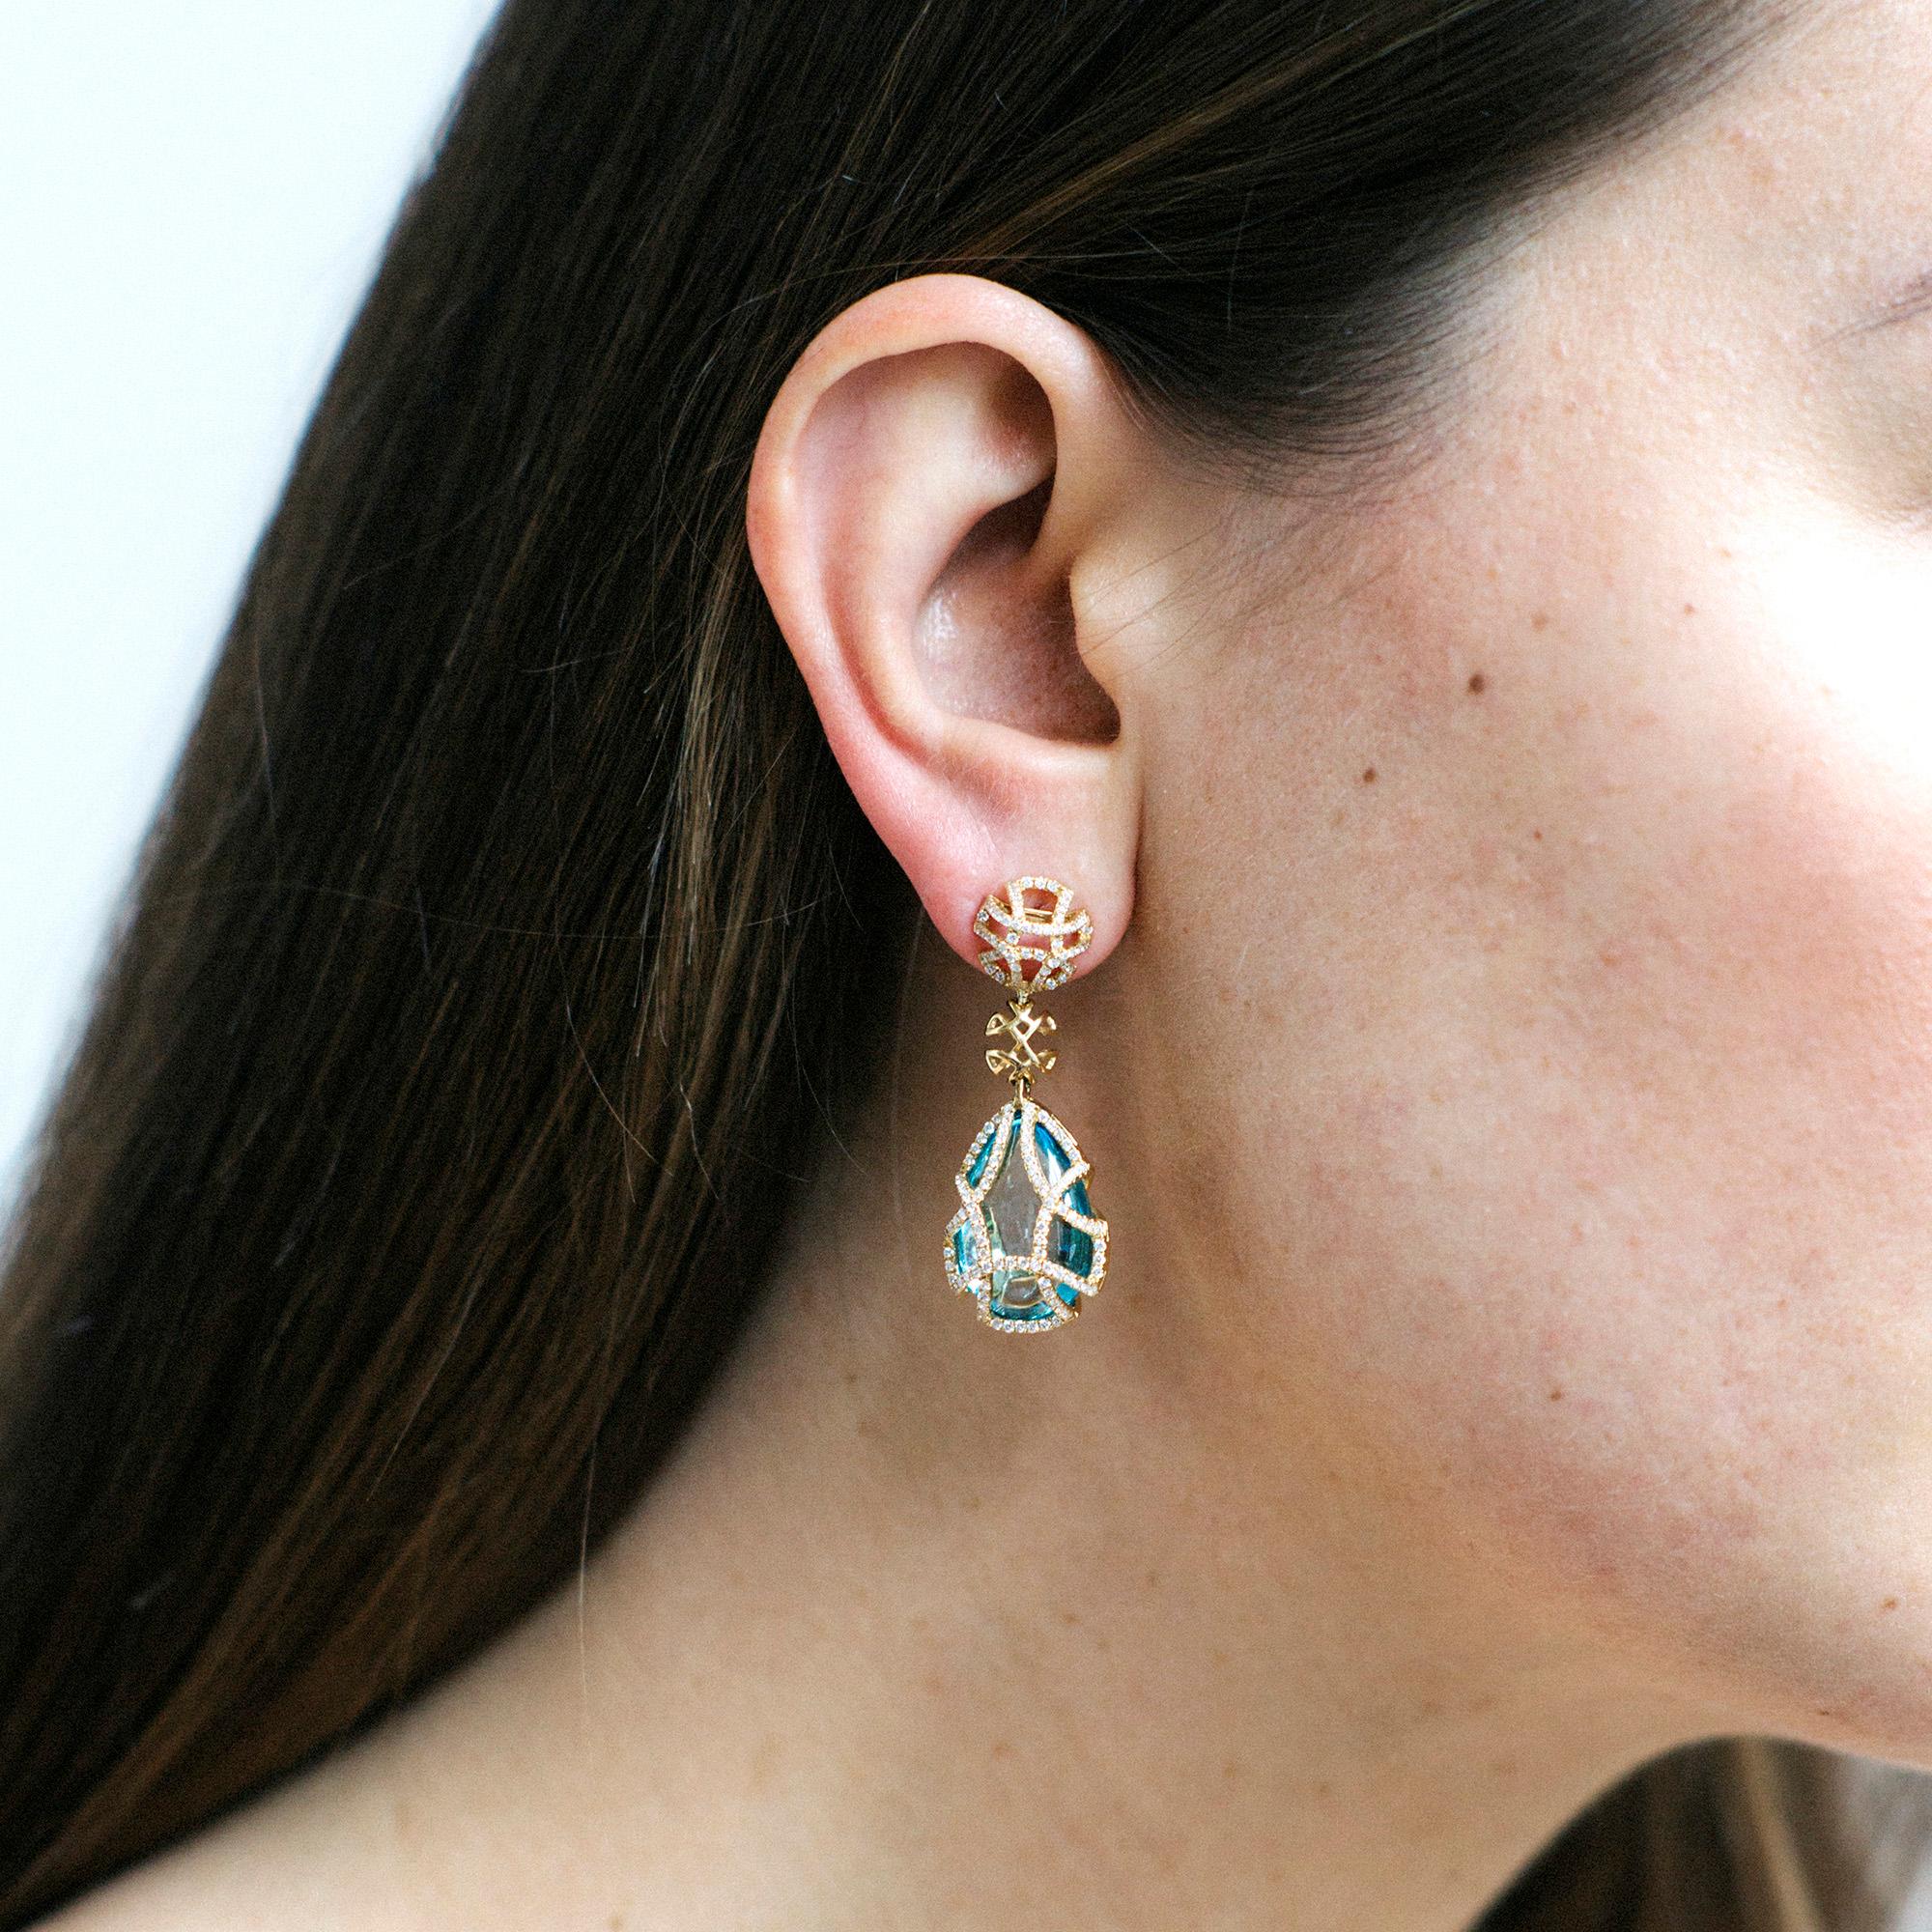 These Blue Topaz Teardrop Cage Earring with Diamonds in 18K Yellow Gold is a stunning piece of jewelry from the 'Freedom' collection. The earring features a teardrop-shaped blue topaz gemstone set in a delicate cage-like structure made of 18K yellow